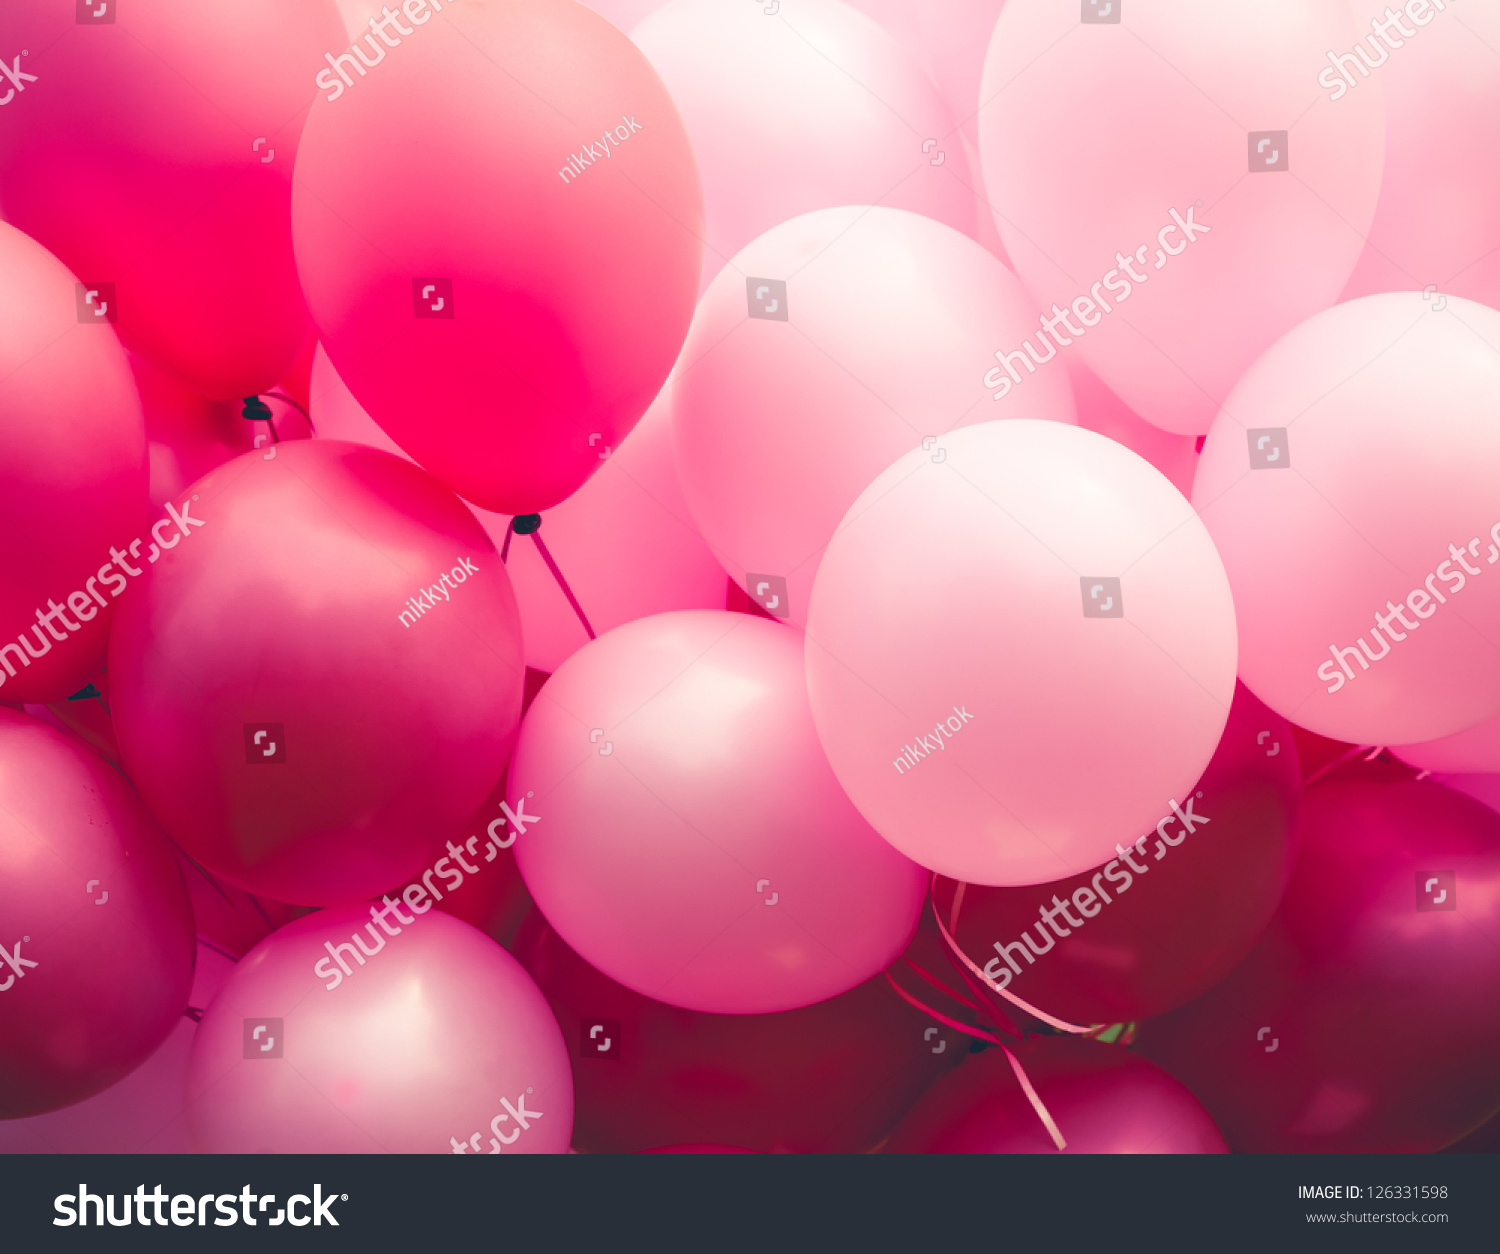 Pink Balloons Background Stock Photo 126331598 - Shutterstock